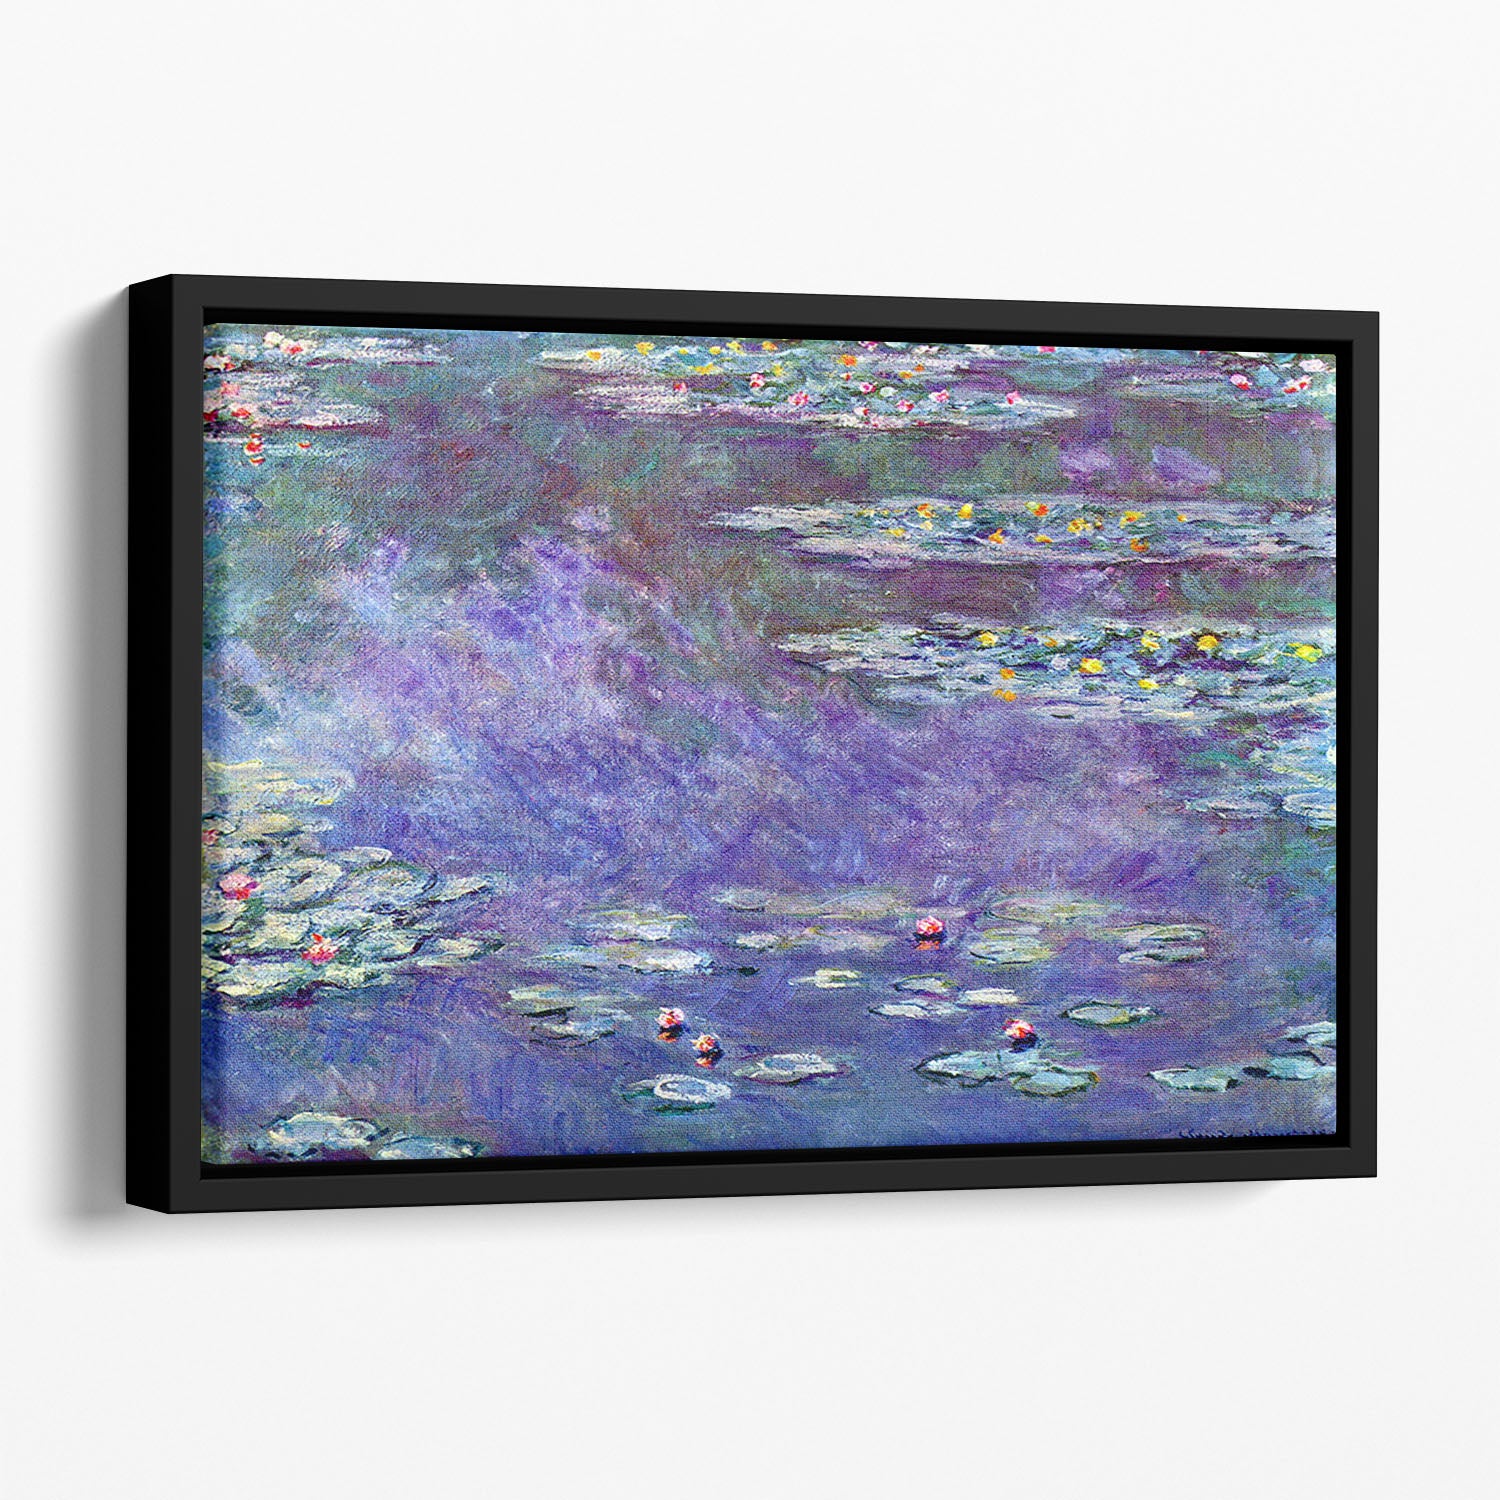 Water Lily Pond 3 by Monet Floating Framed Canvas